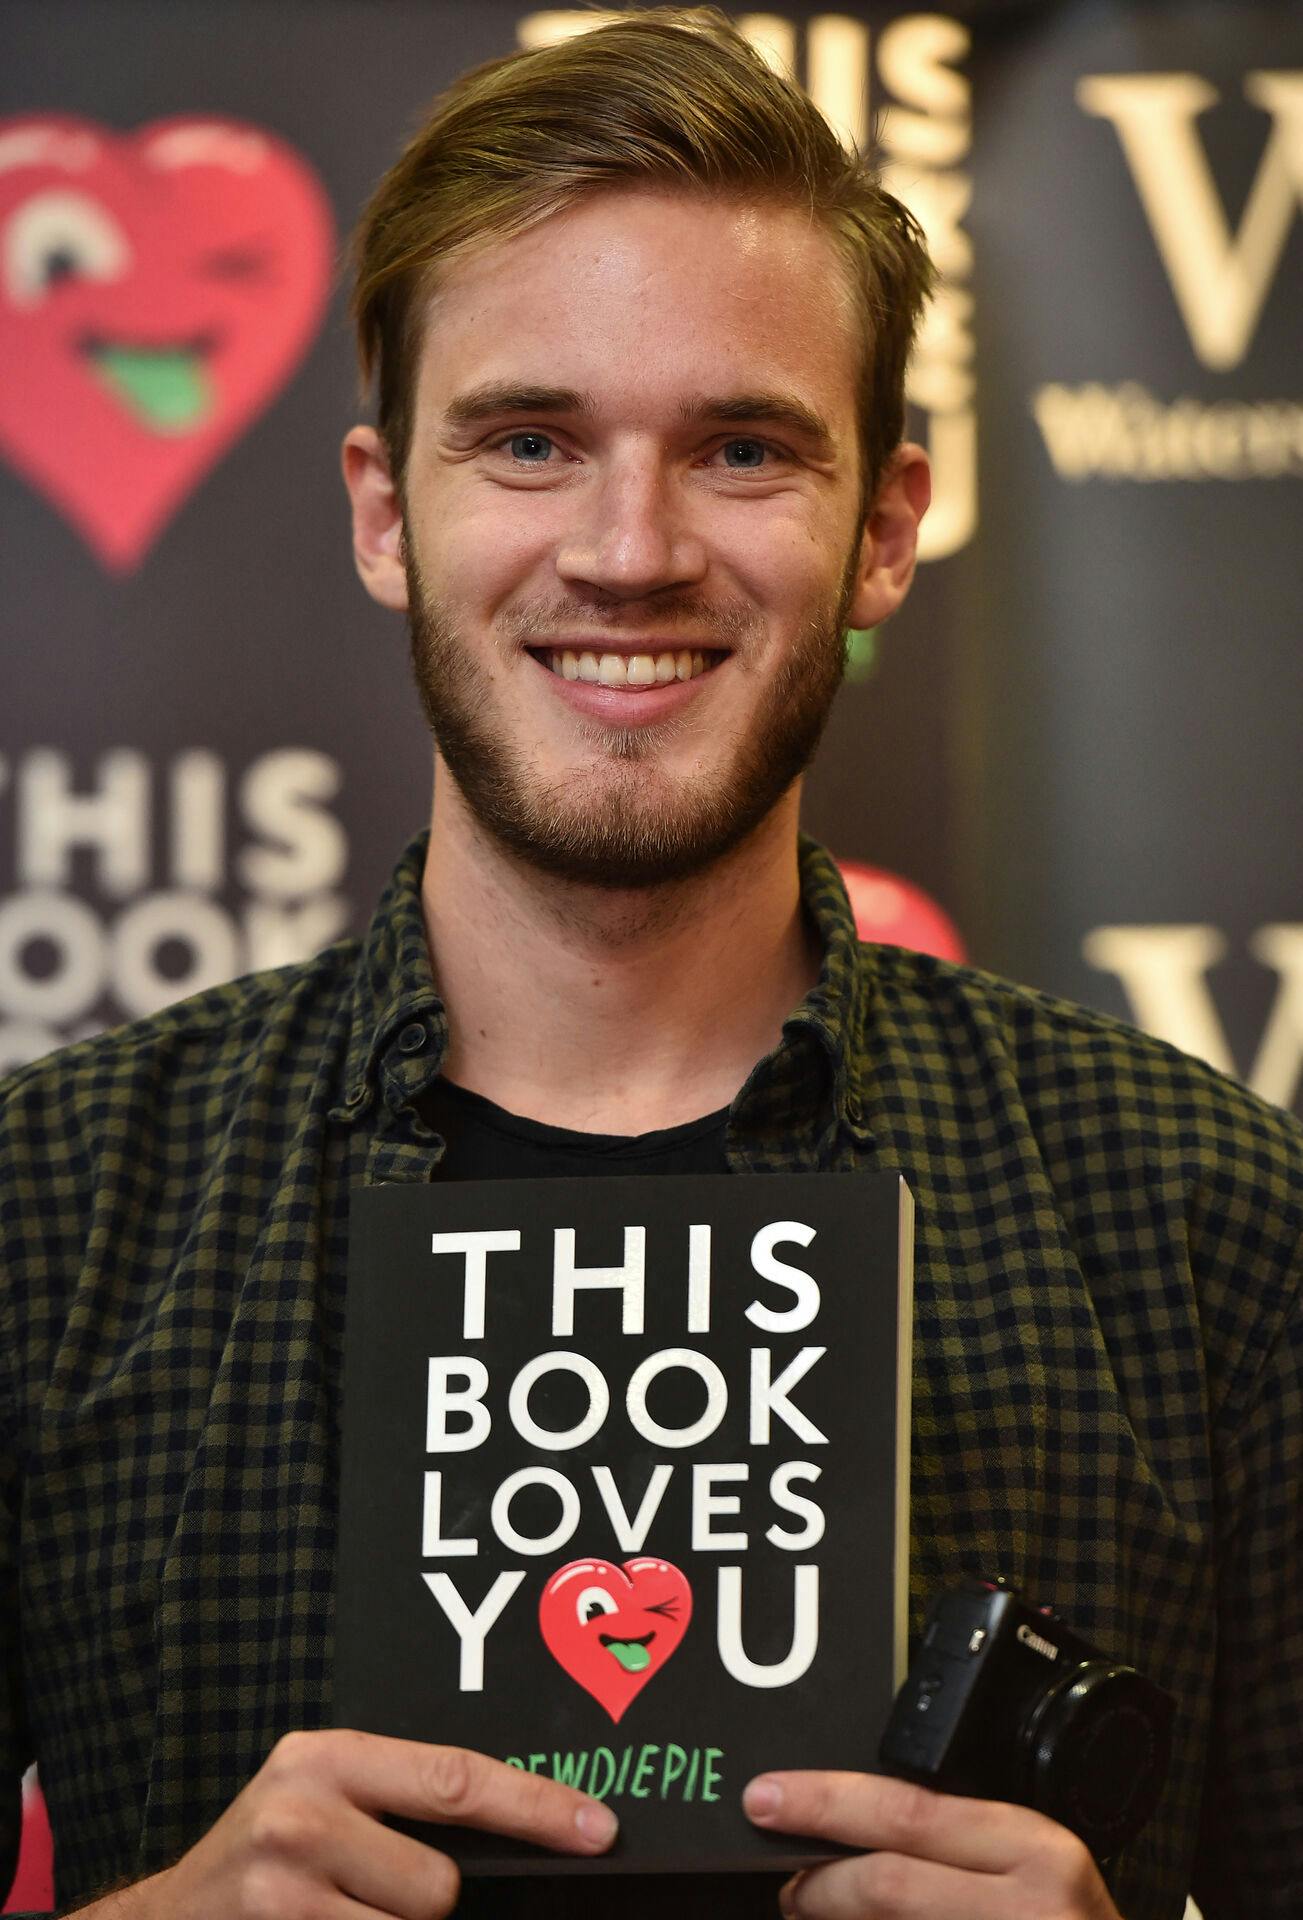 Swedish video game commentator Felix Kjellberg, aka PewDiePie poses with his new book, 'This book loves you' at an event in central London, on October 18, 2015. AFP PHOTO / BEN STANSALL. BEN STANSALL / AFP